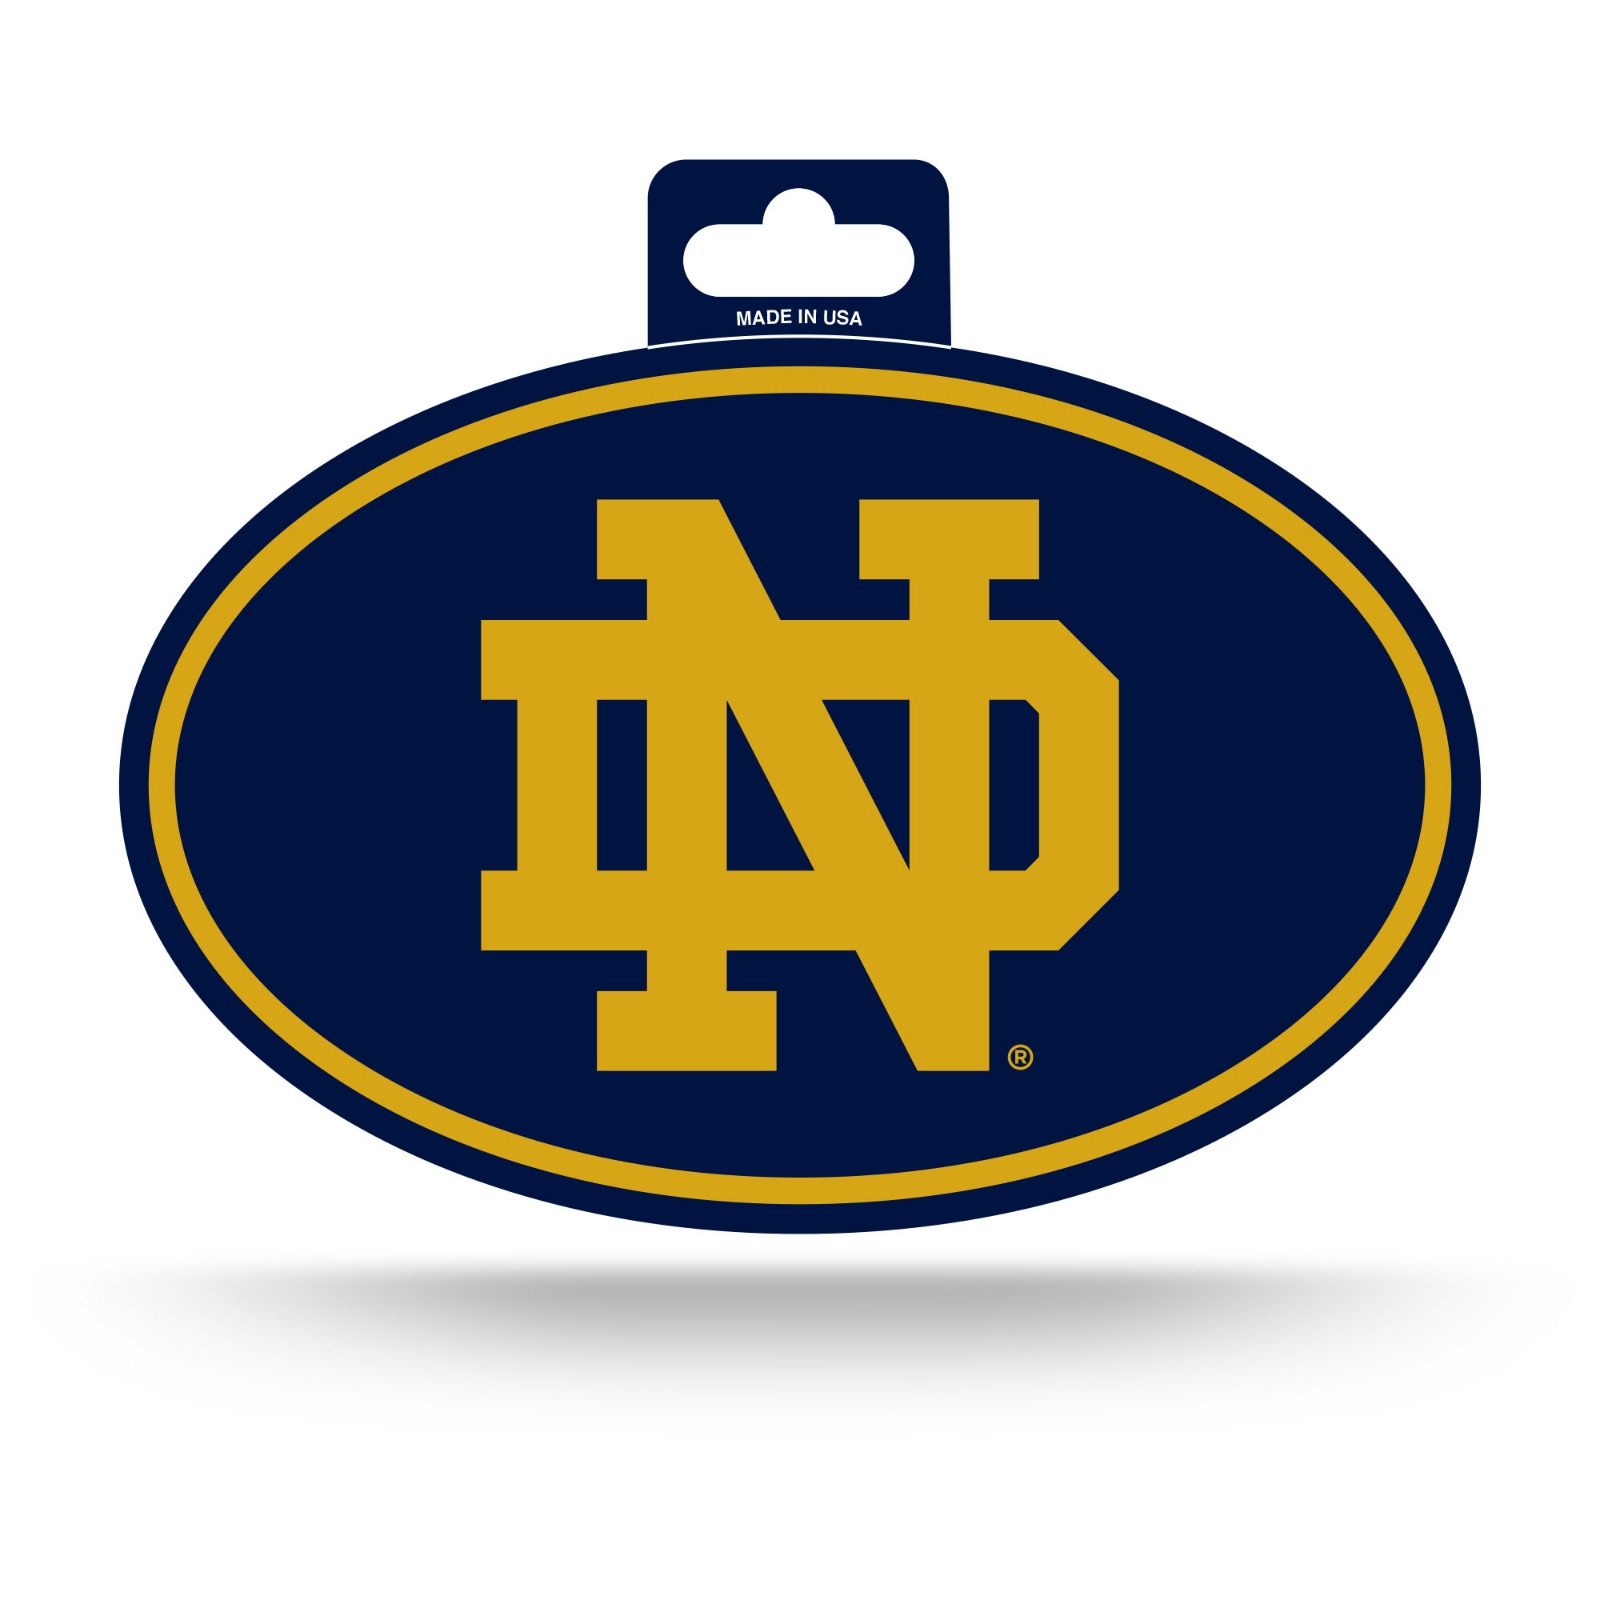 Notre Dame Fighting Irish Oval Decal Sticker Full Color NEW 3x5 Inches